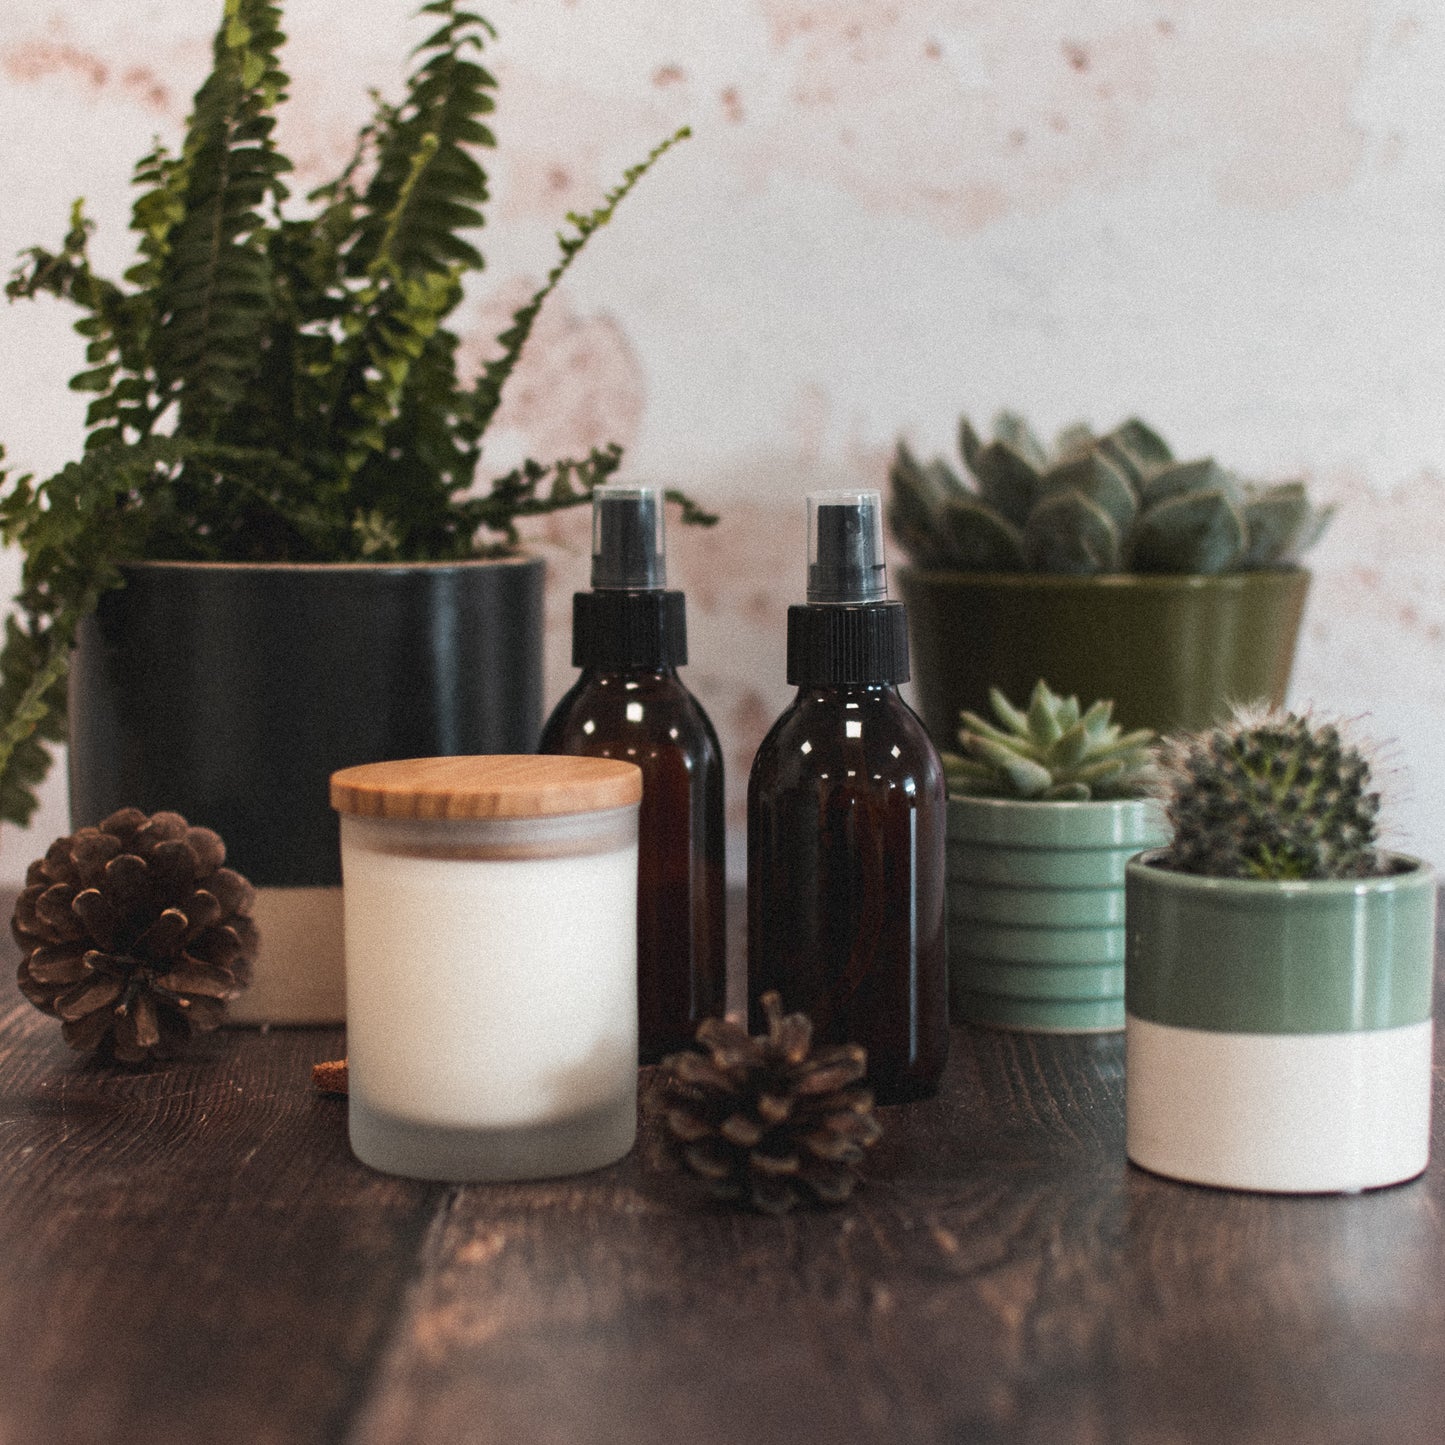 Eco-friendly Natural Self care from the little fern co